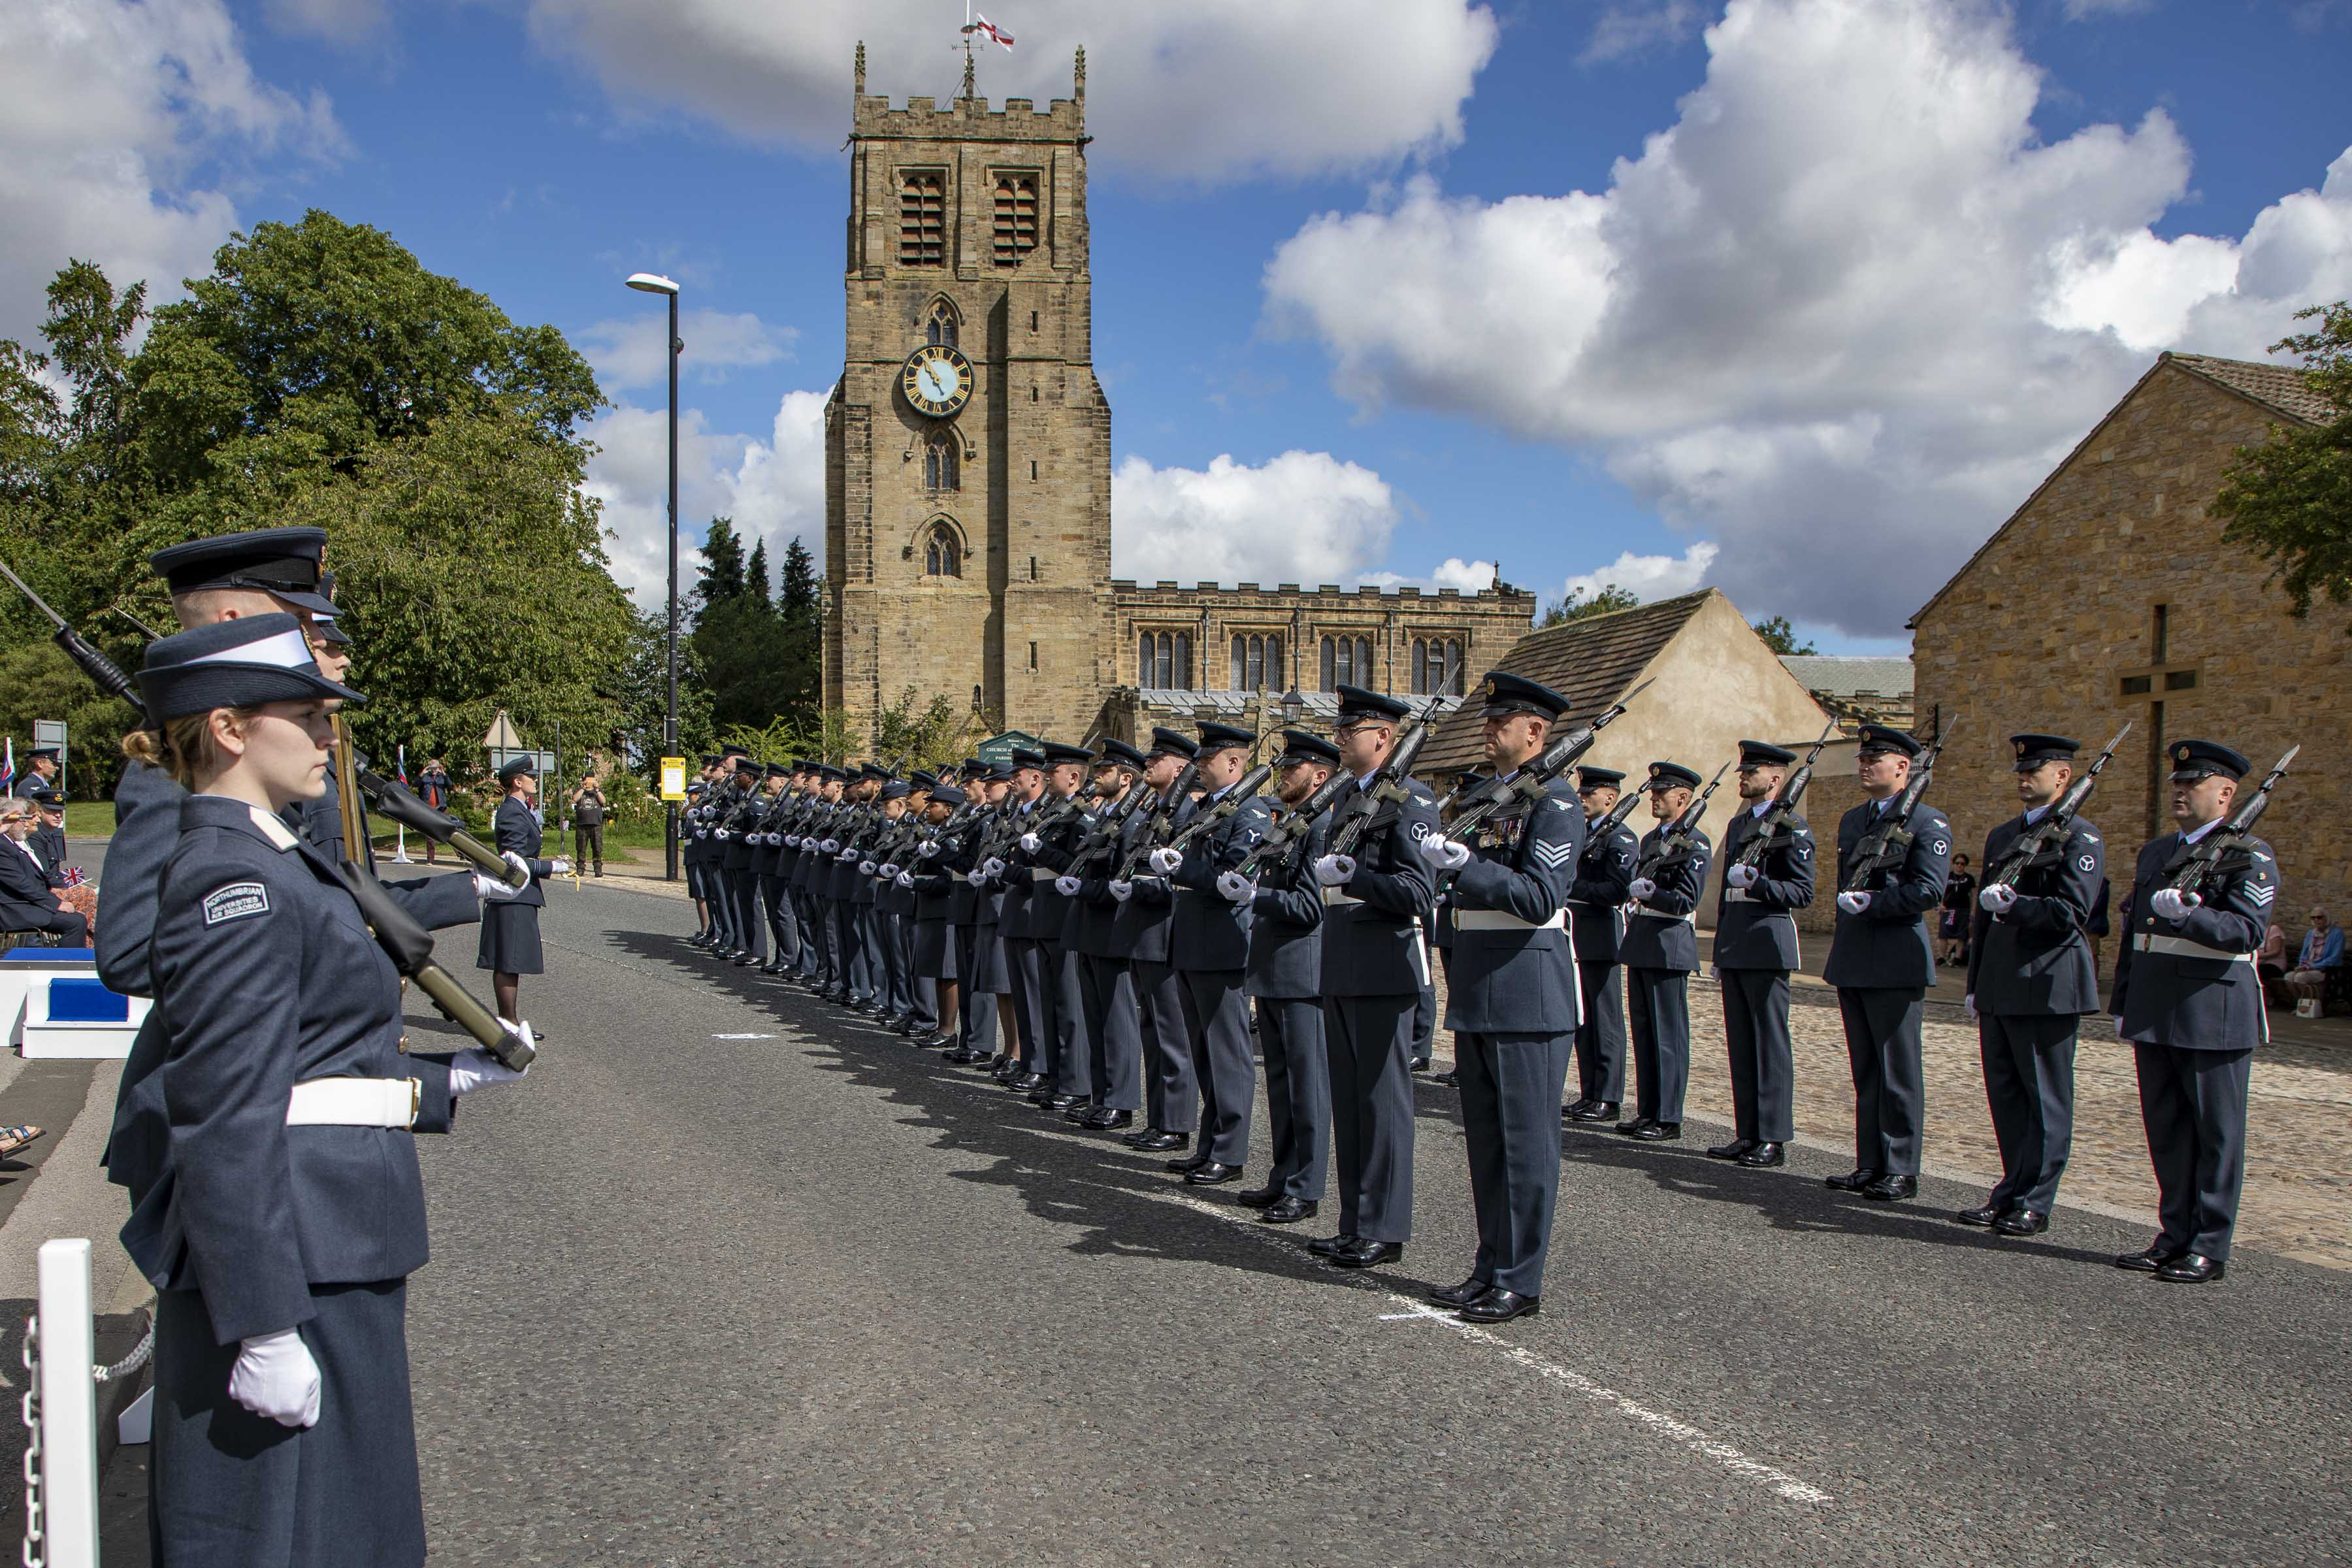 Image shows RAF aviators in parade with cathedral in the background.